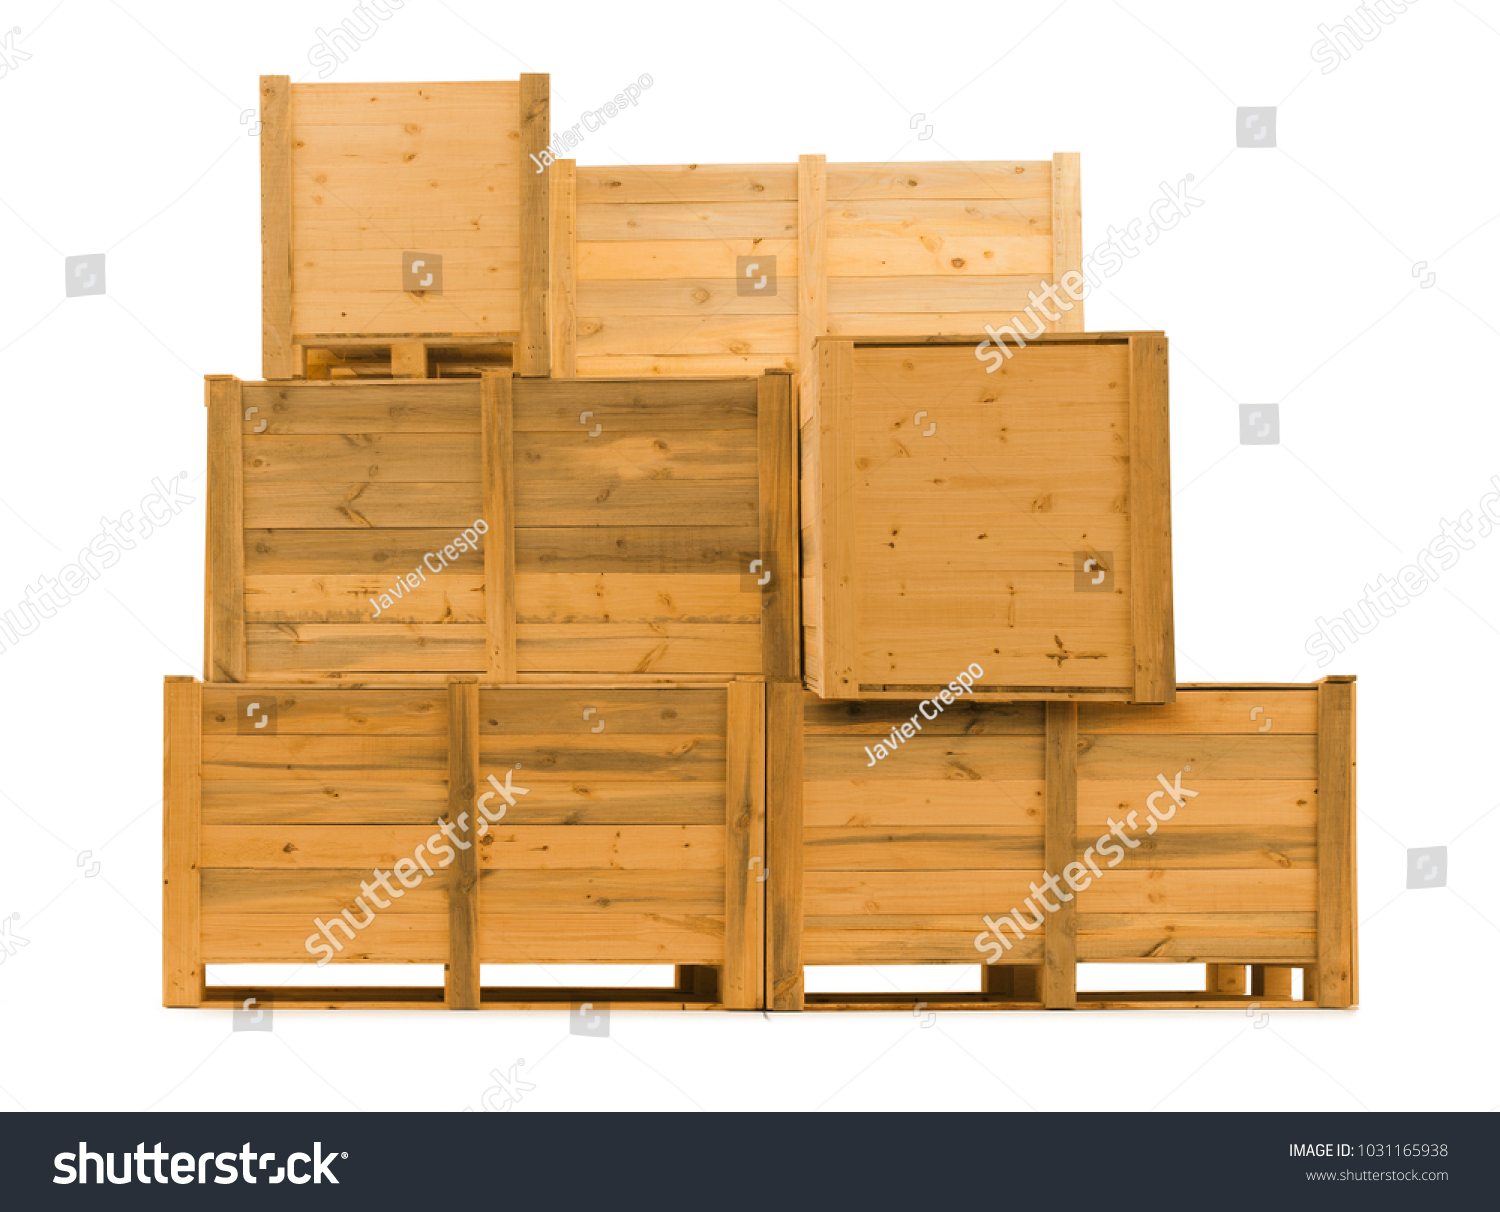 wooden crates for transport of merchandise #1031165938